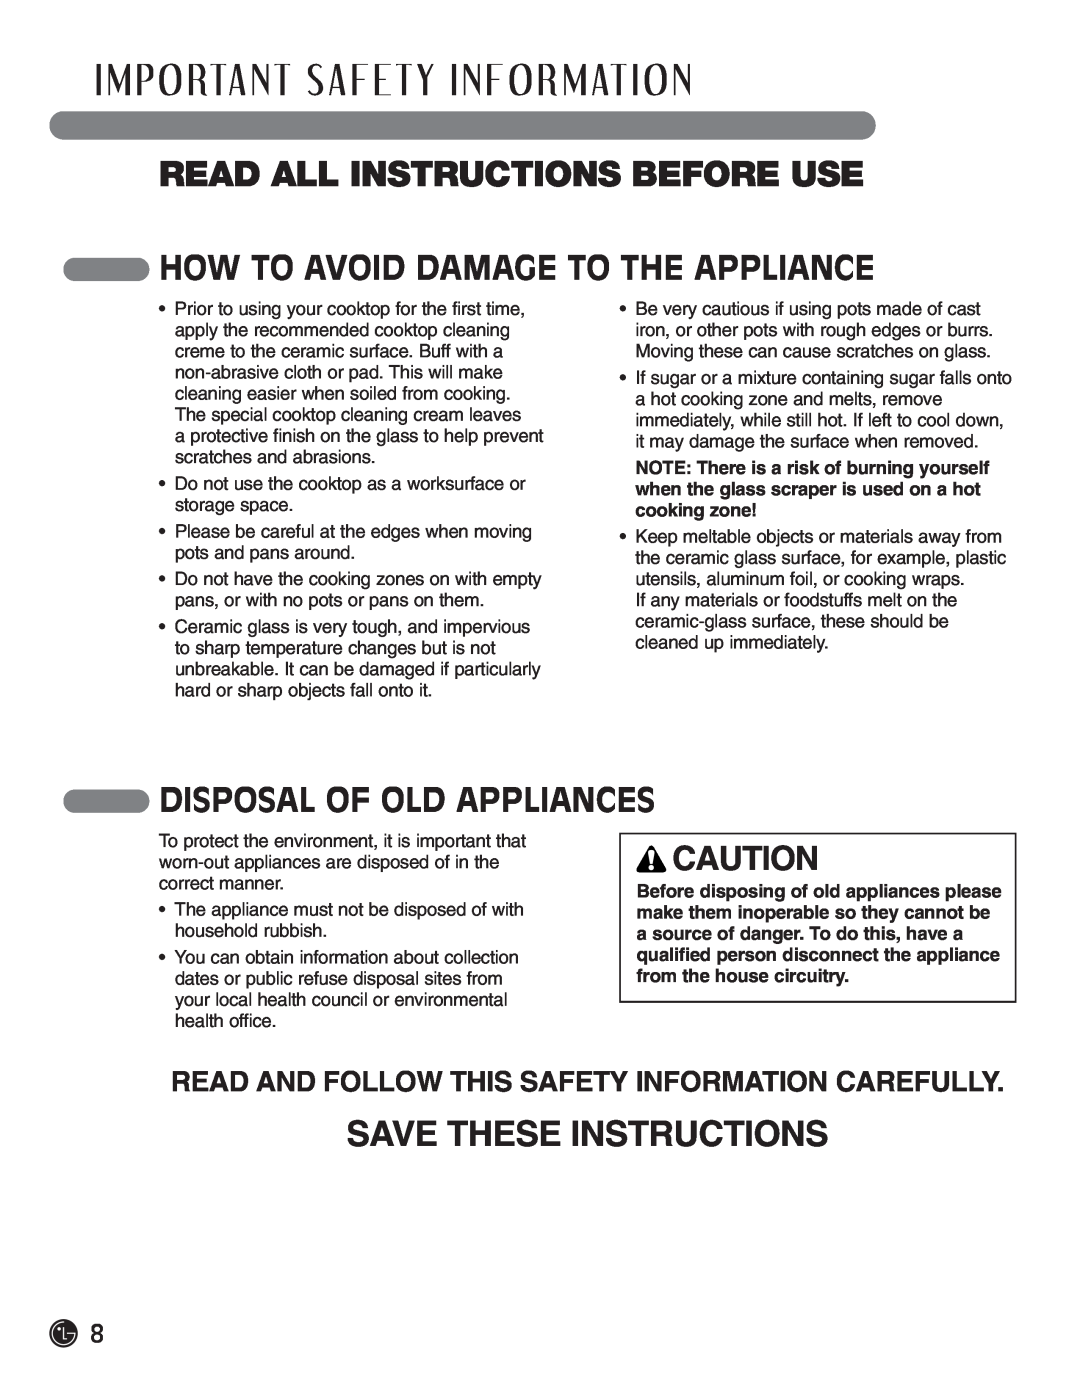 LG Electronics LCE30845 How To Avoid Damage To The Appliance, Disposal Of Old Appliances, Read All Instructions Before Use 